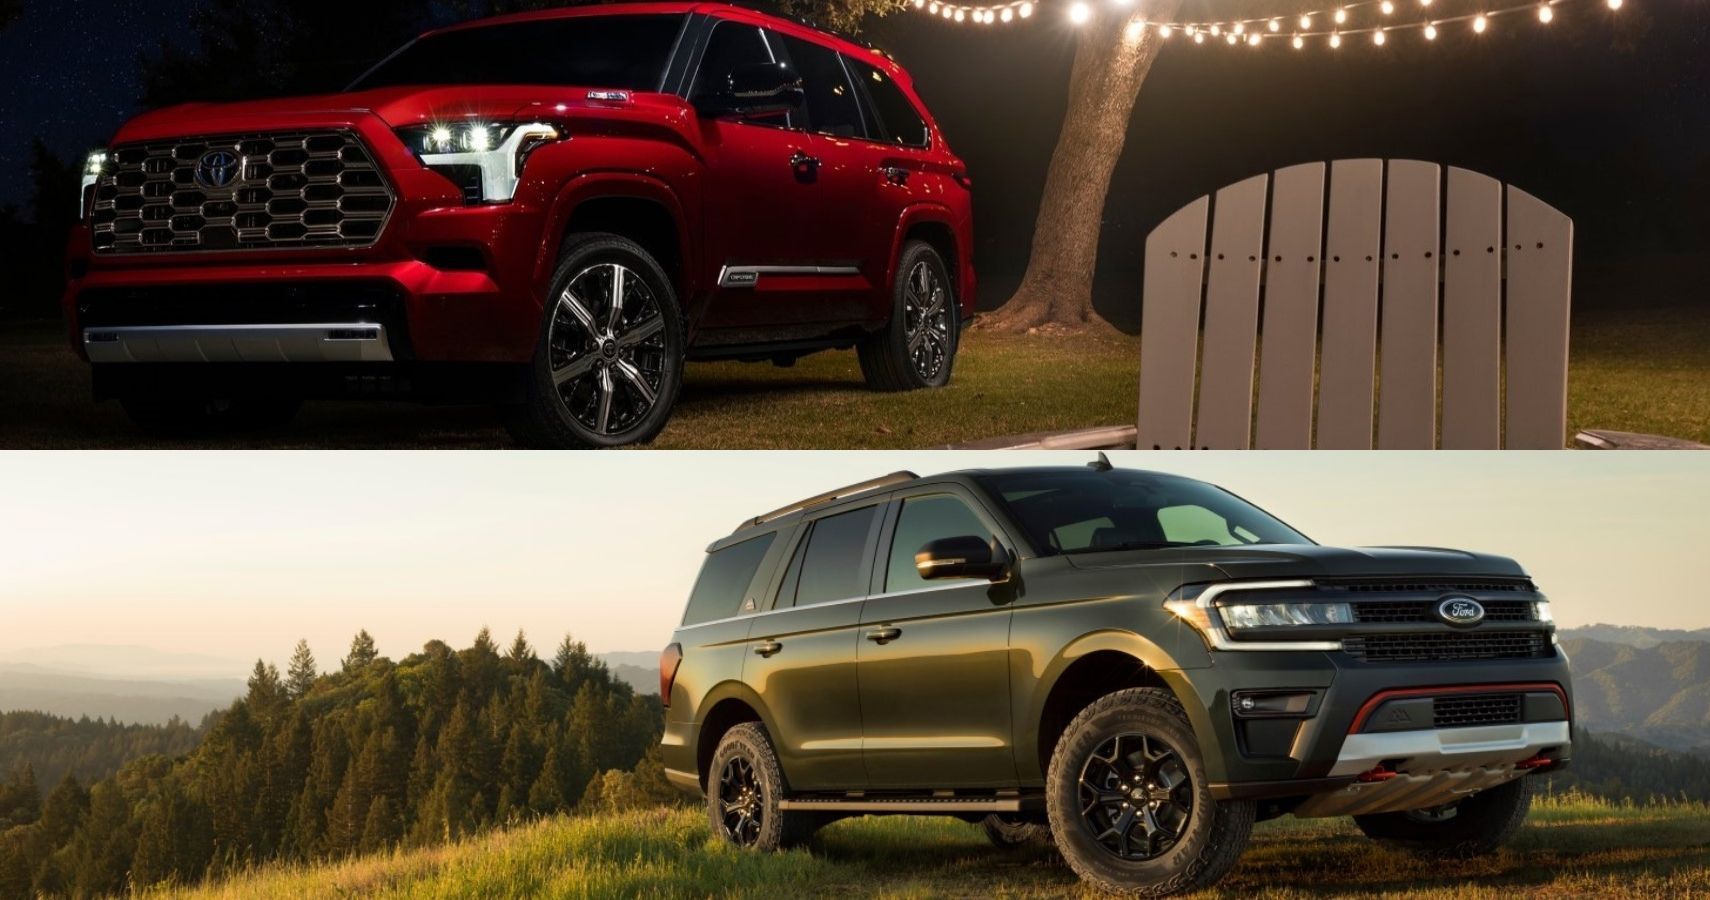 Here’s How The 2023 Toyota Sequoia Compares To The Ford Expedition